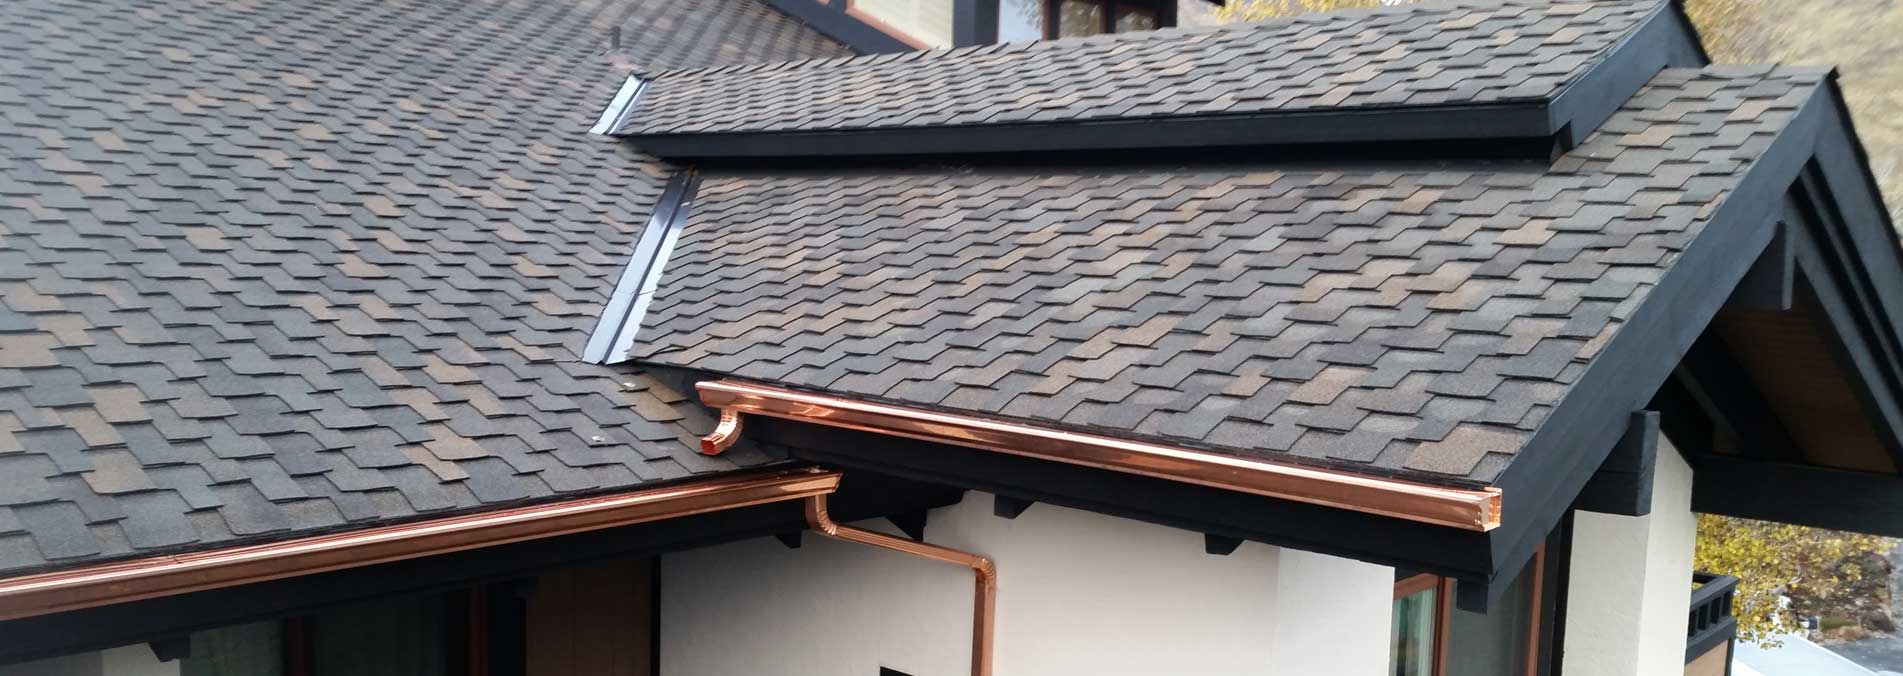 House With Gutters